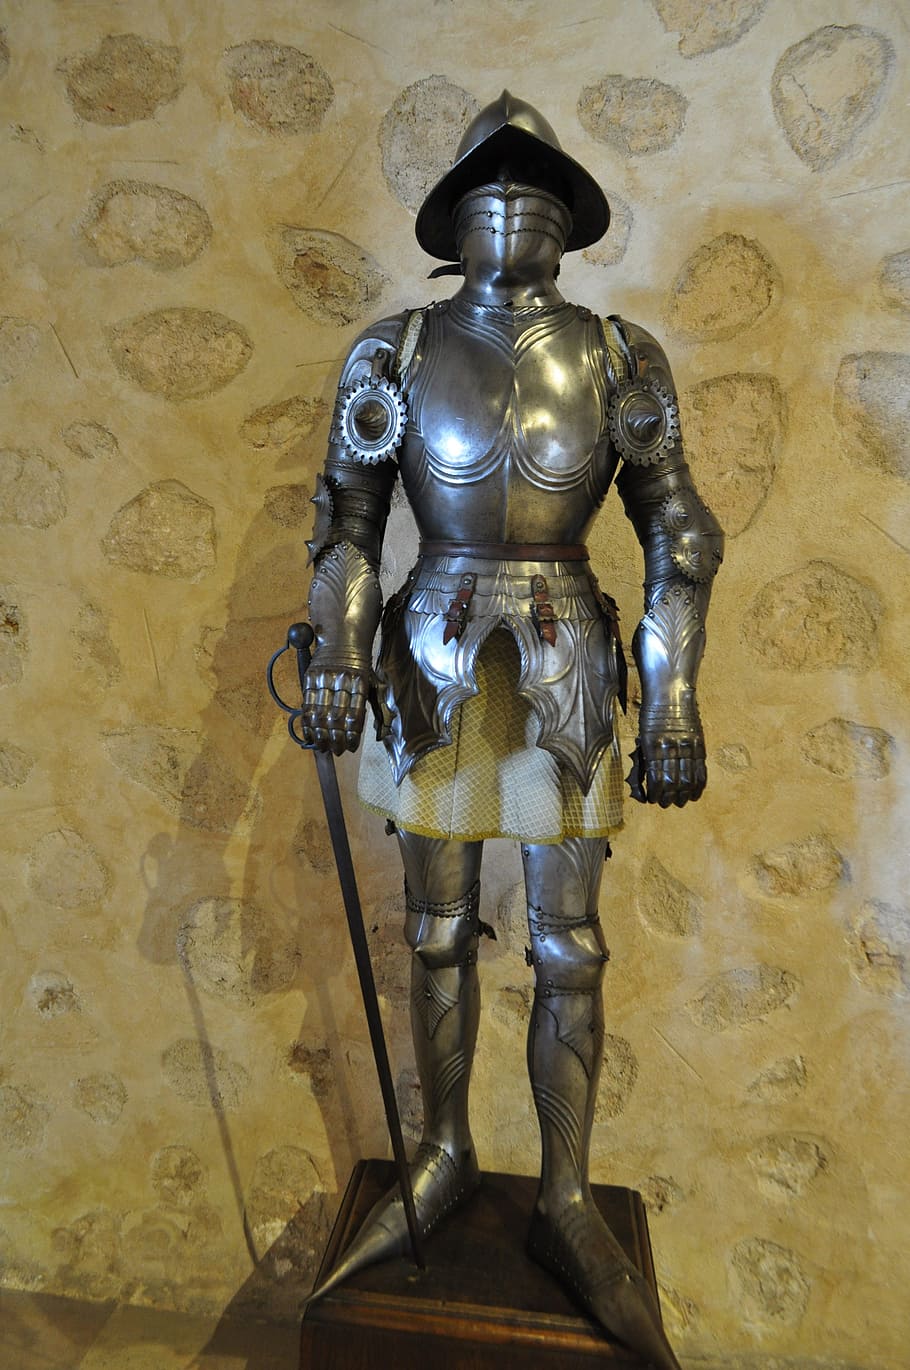 Armor, War, Medieval, Shiny, silver, armour, soldier, weapon, military, army